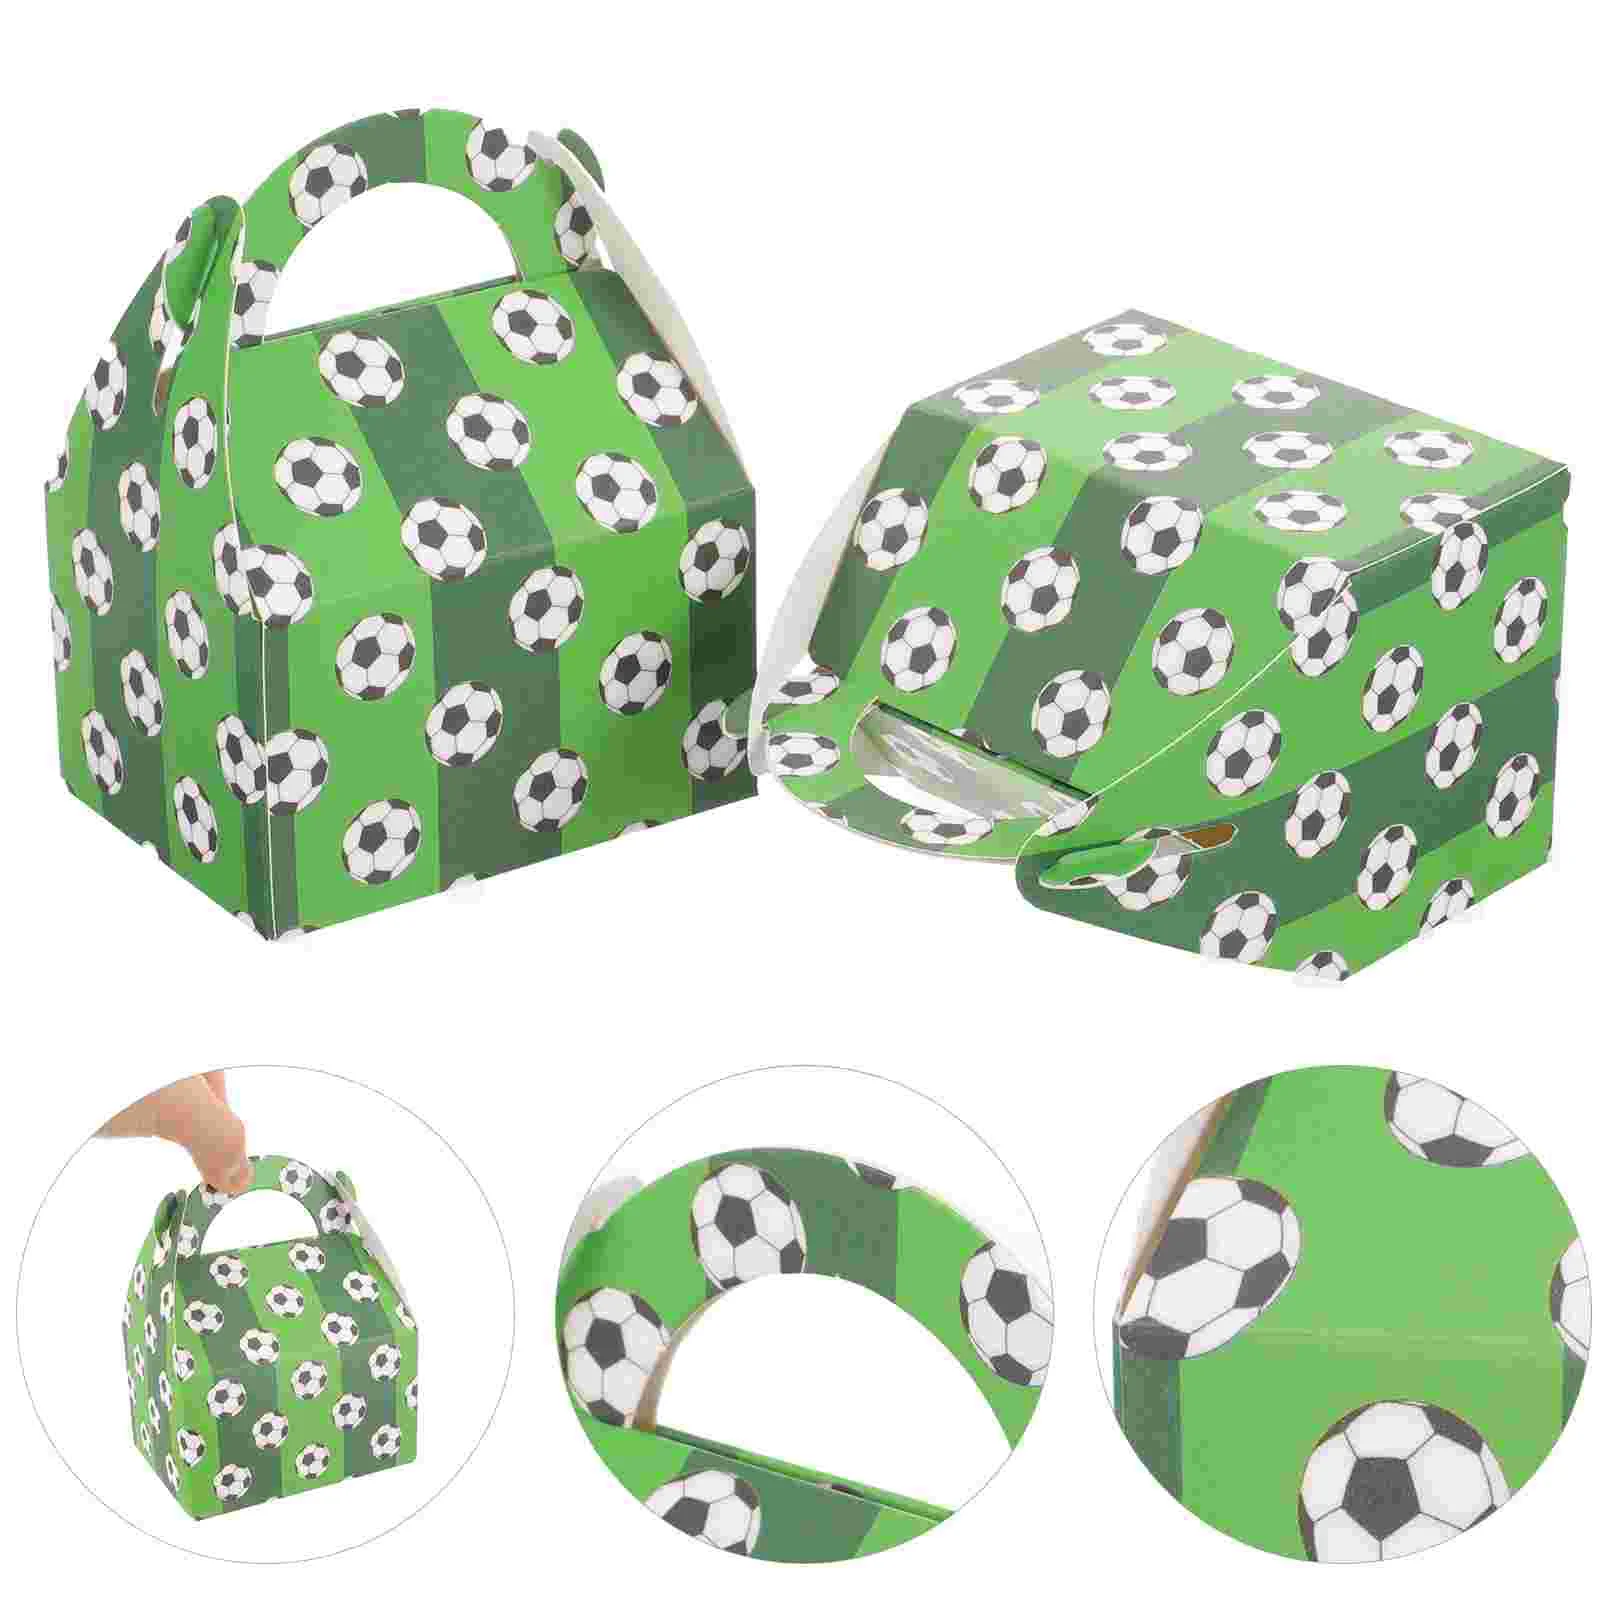 

50pcs Goody Candy Boxes Cardboard Treat Boxes with Handles Football Pattern Boxes Party Candy Box